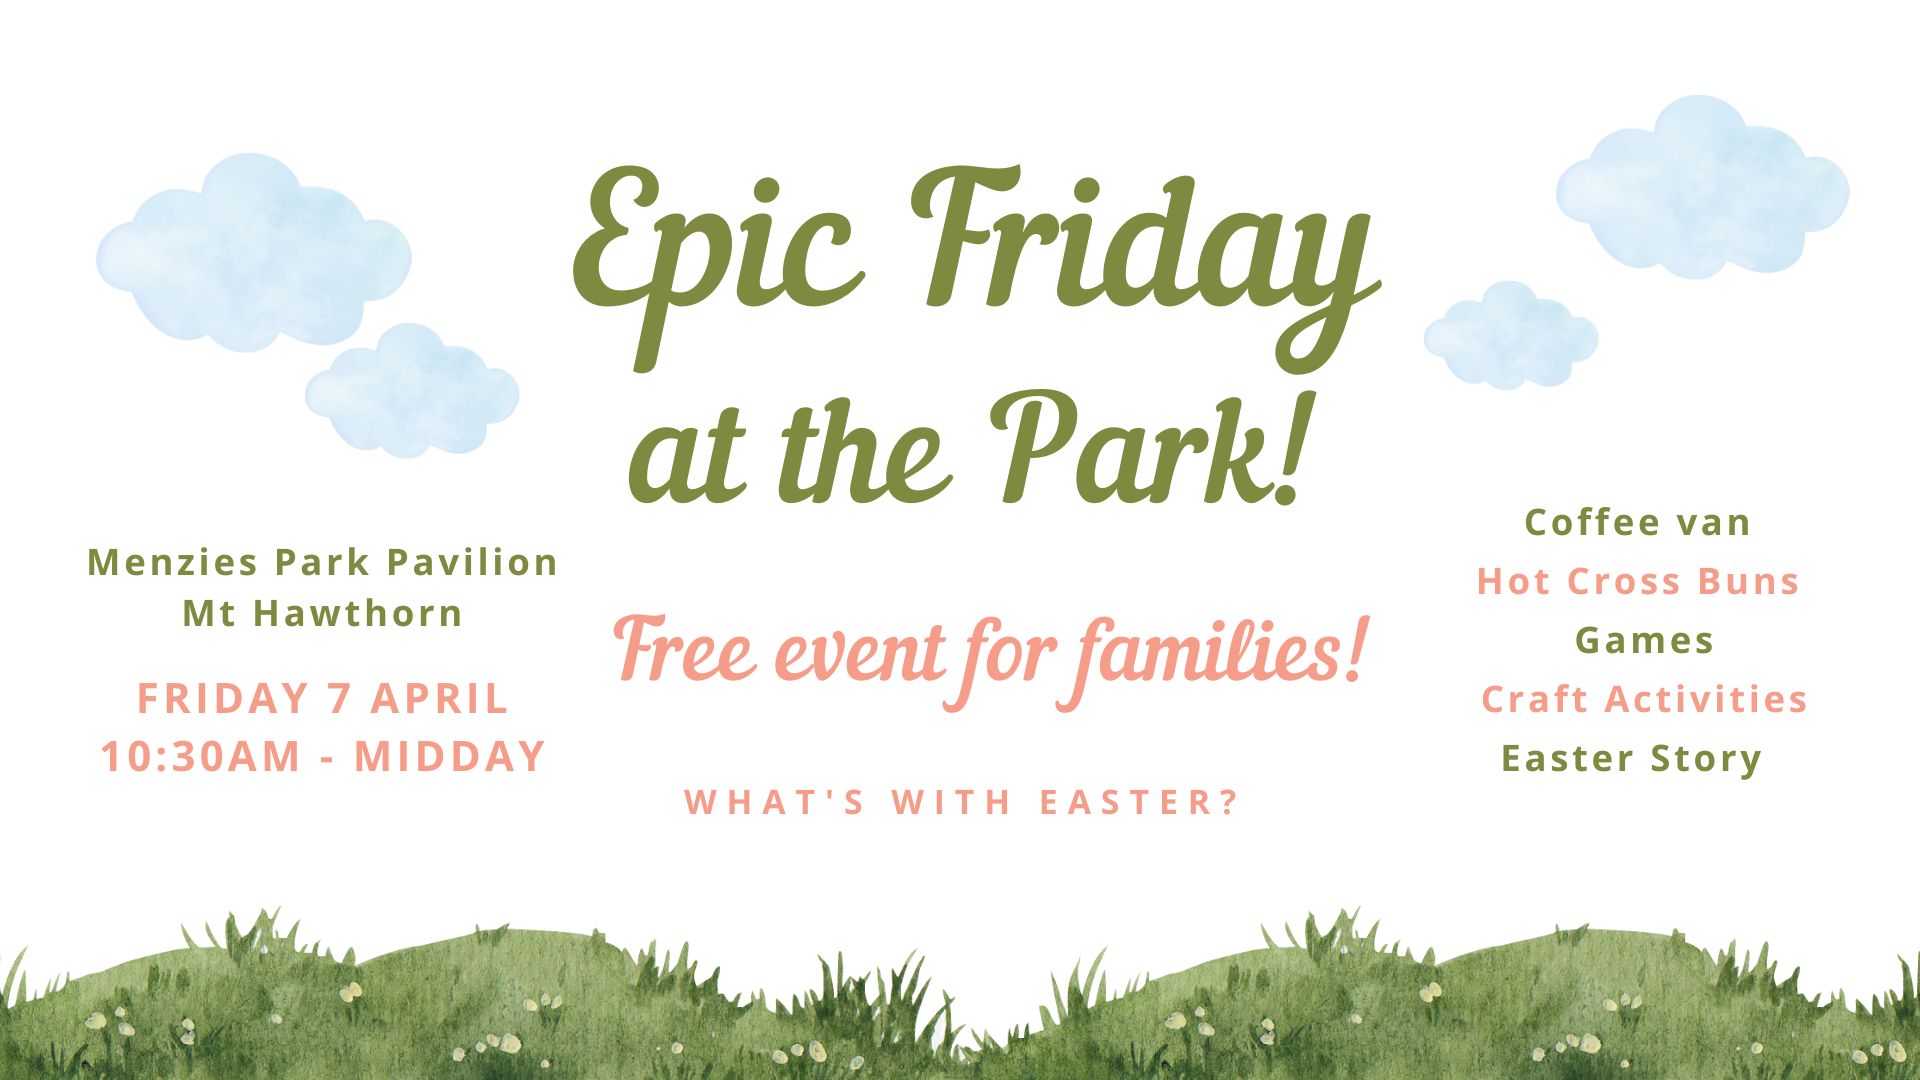 Epic Friday in the Park!